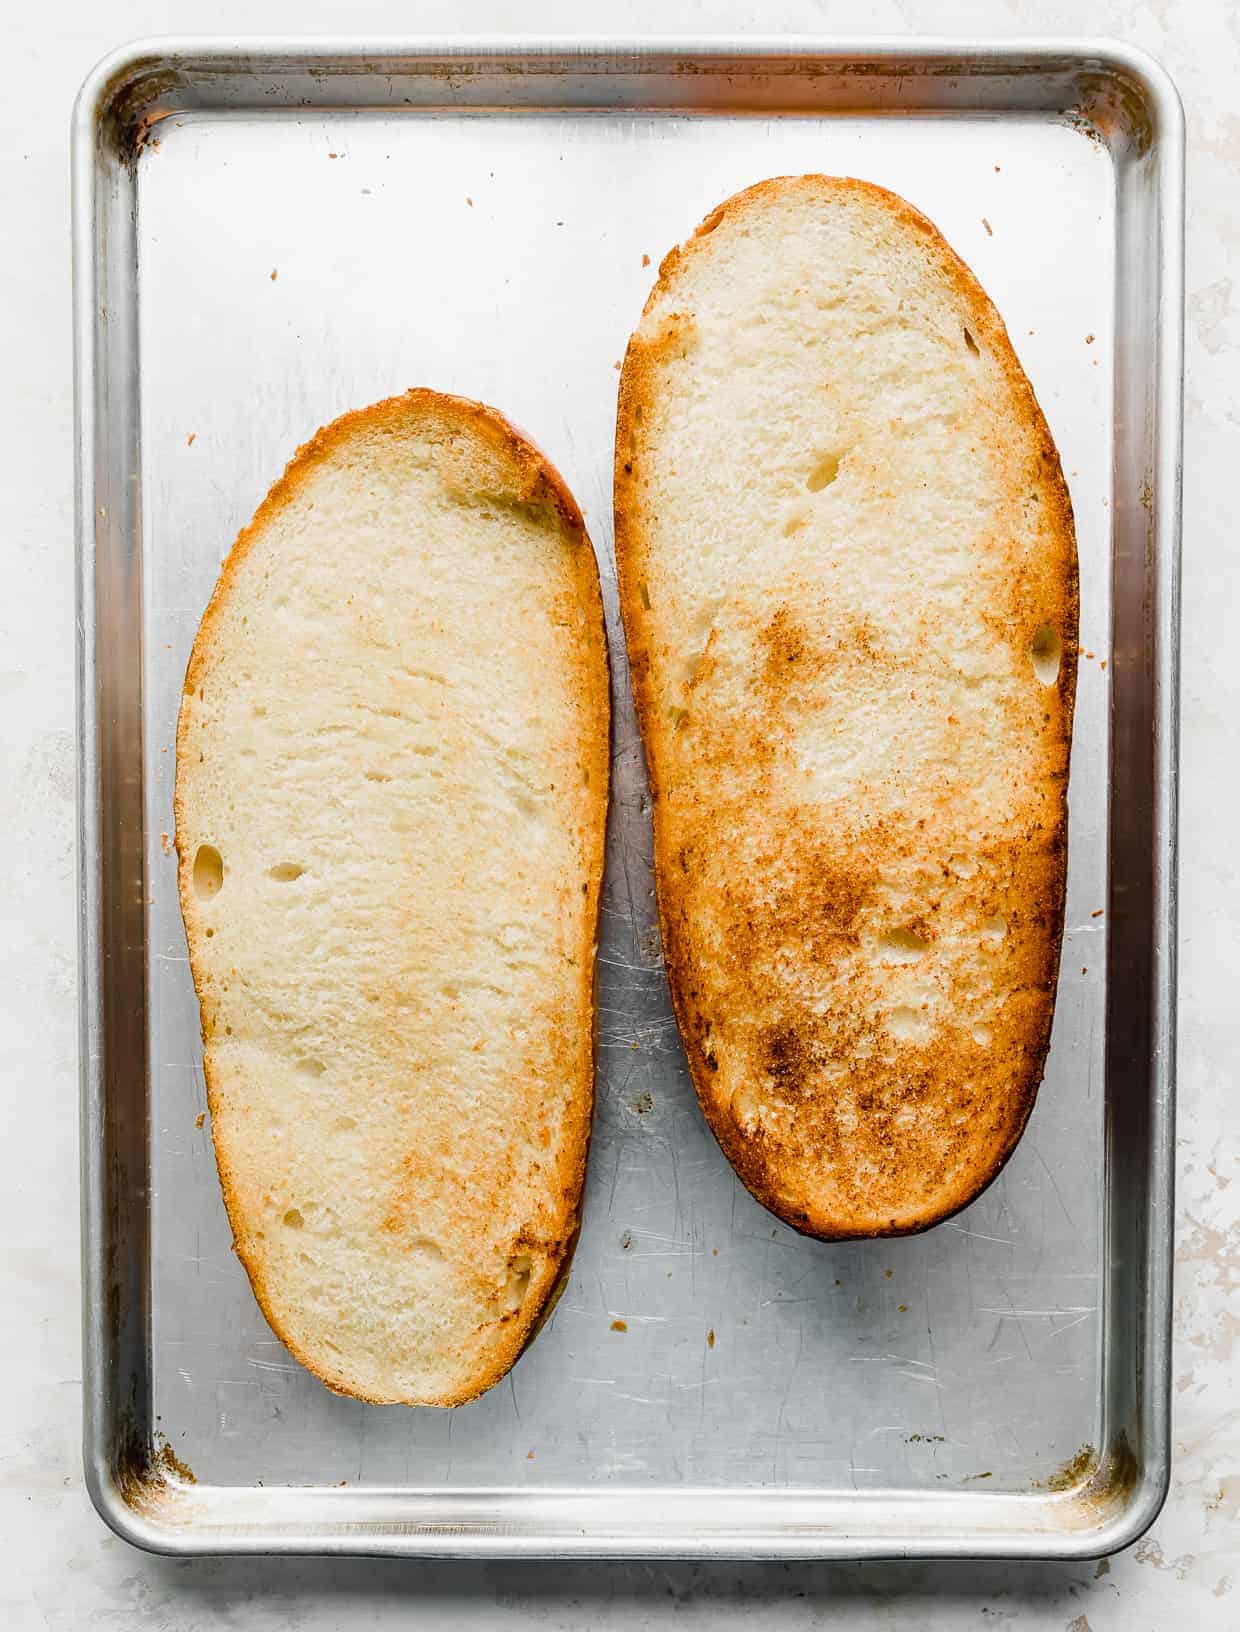 Golden toasted French bread loaf on a baking sheet.